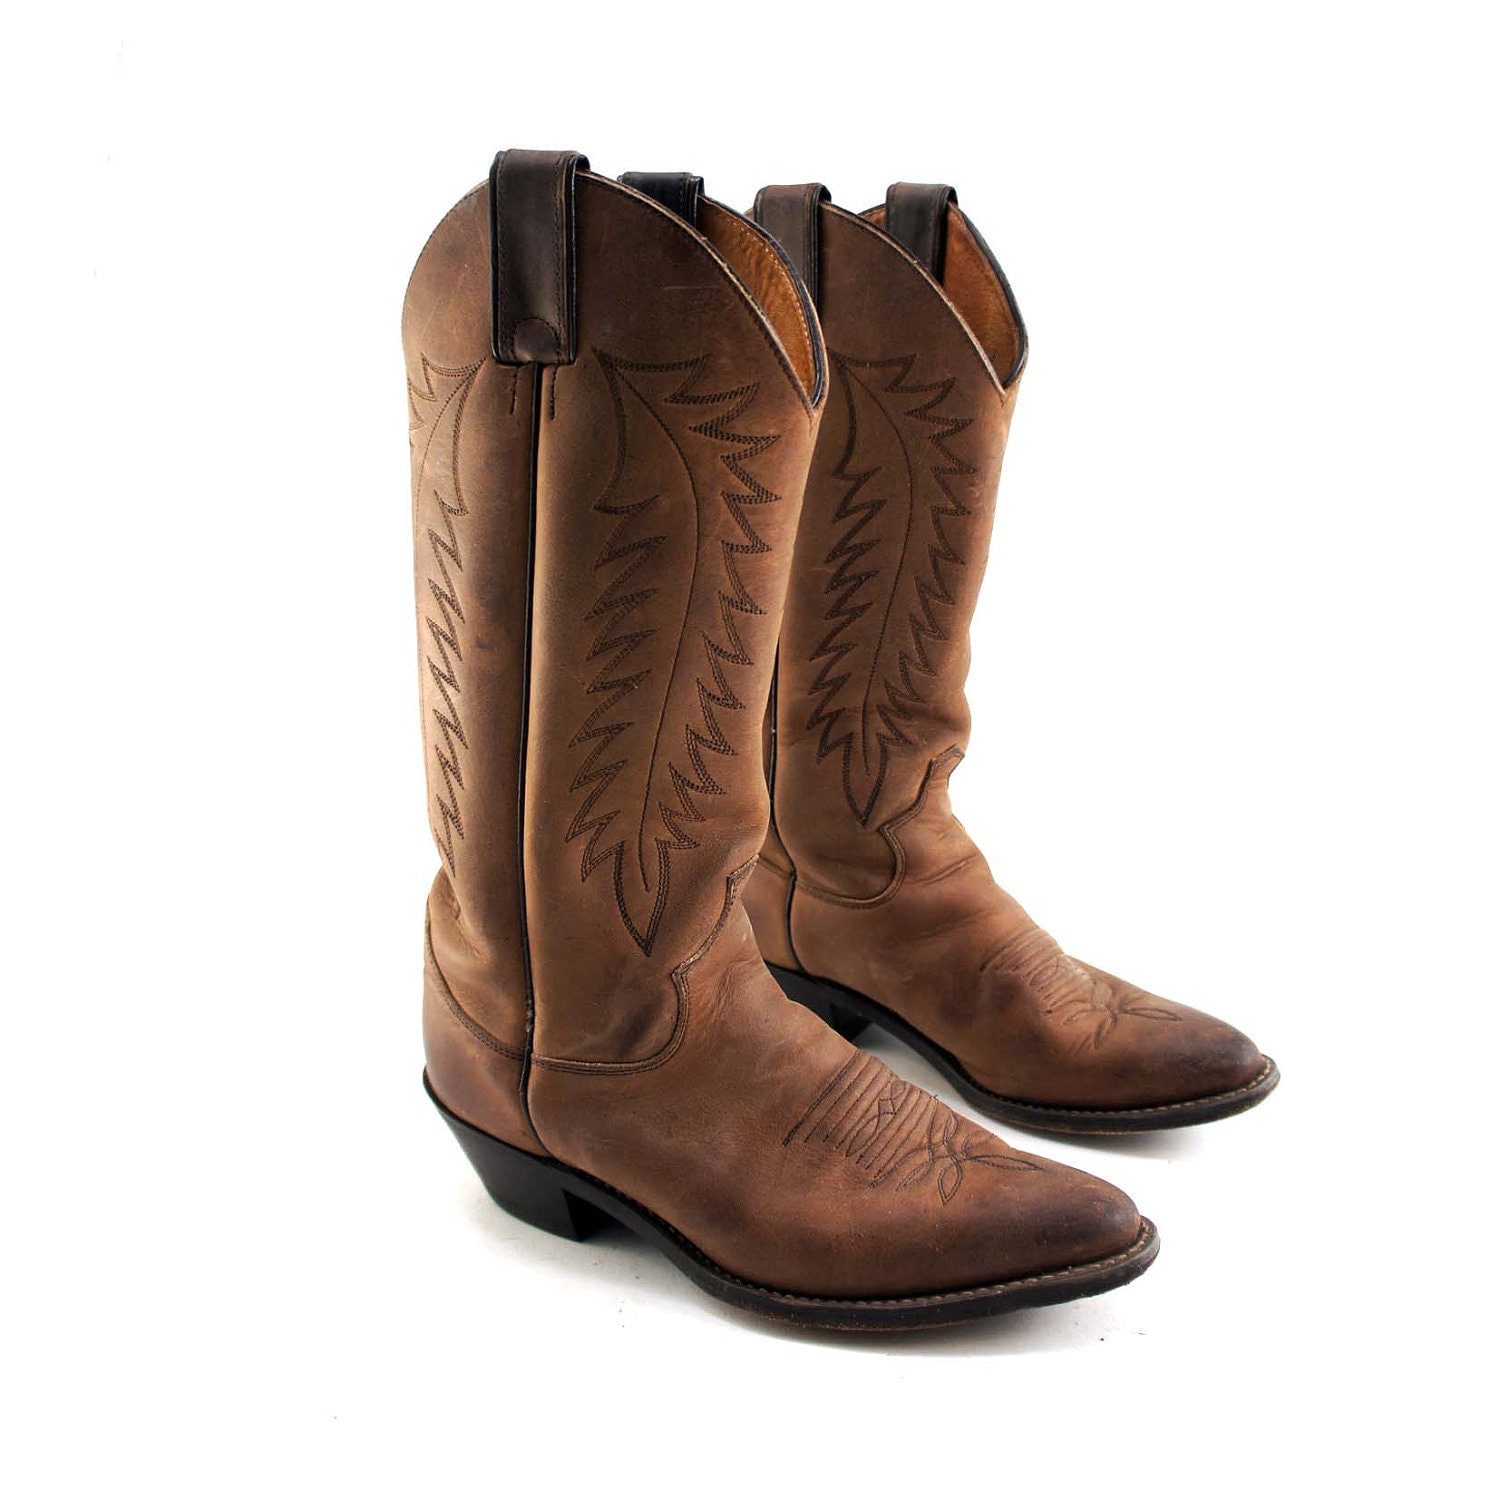 Discount Cowboy Boots For Ladies - Yu Boots